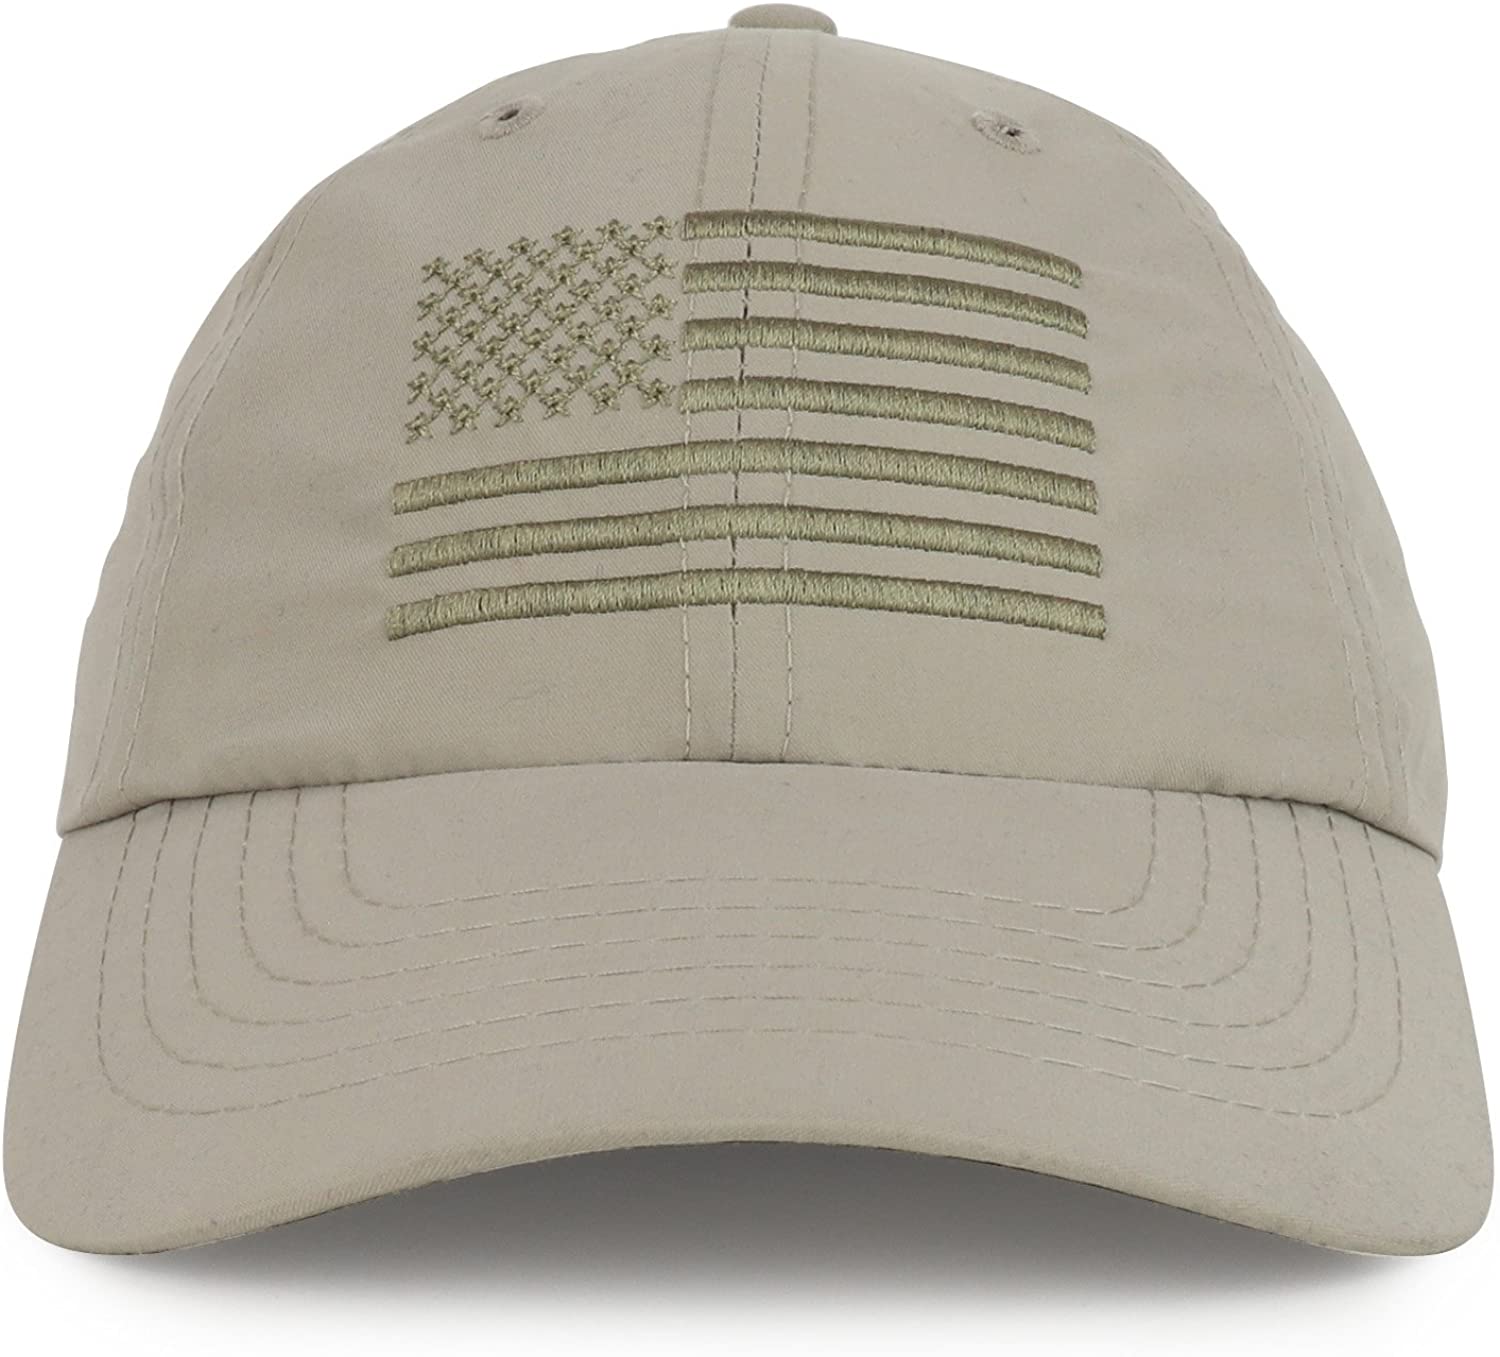 Armycrew USA American Flag Embroidered Microfiber Unstructured Baseball Cap